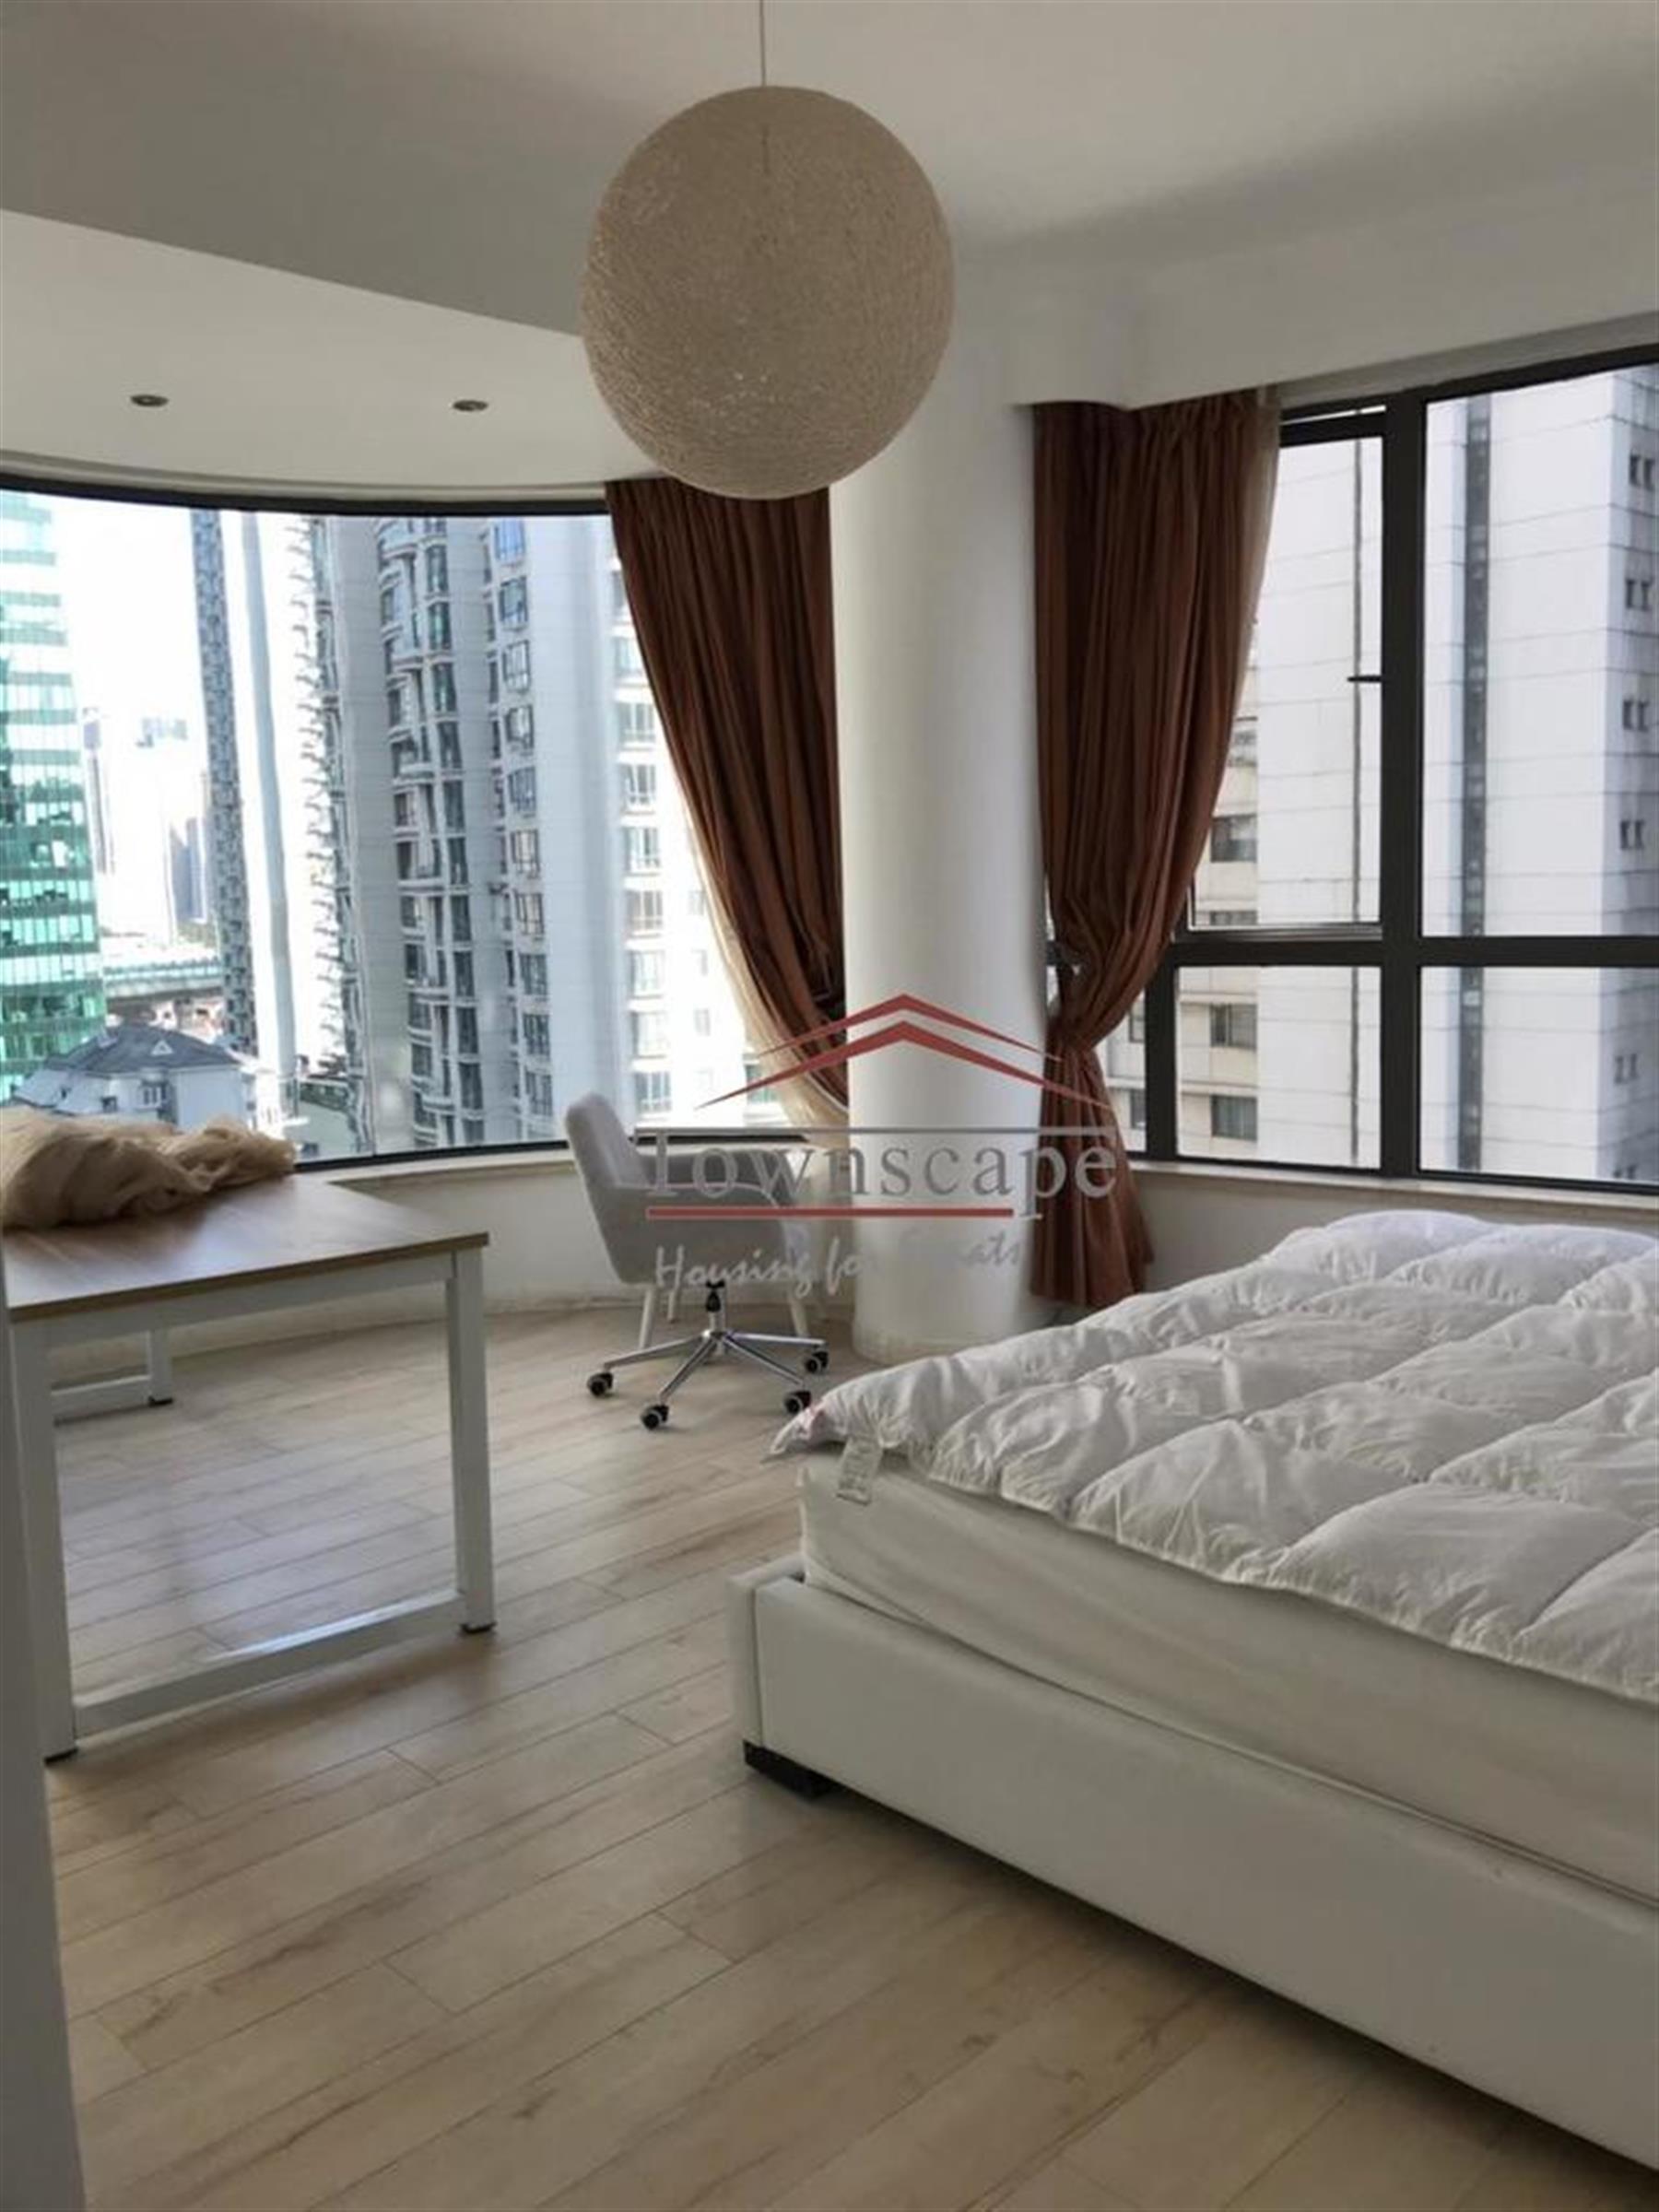 wrap-around windows Spacious Renovated Nanjing W Rd Apartment for Rent in Shanghai